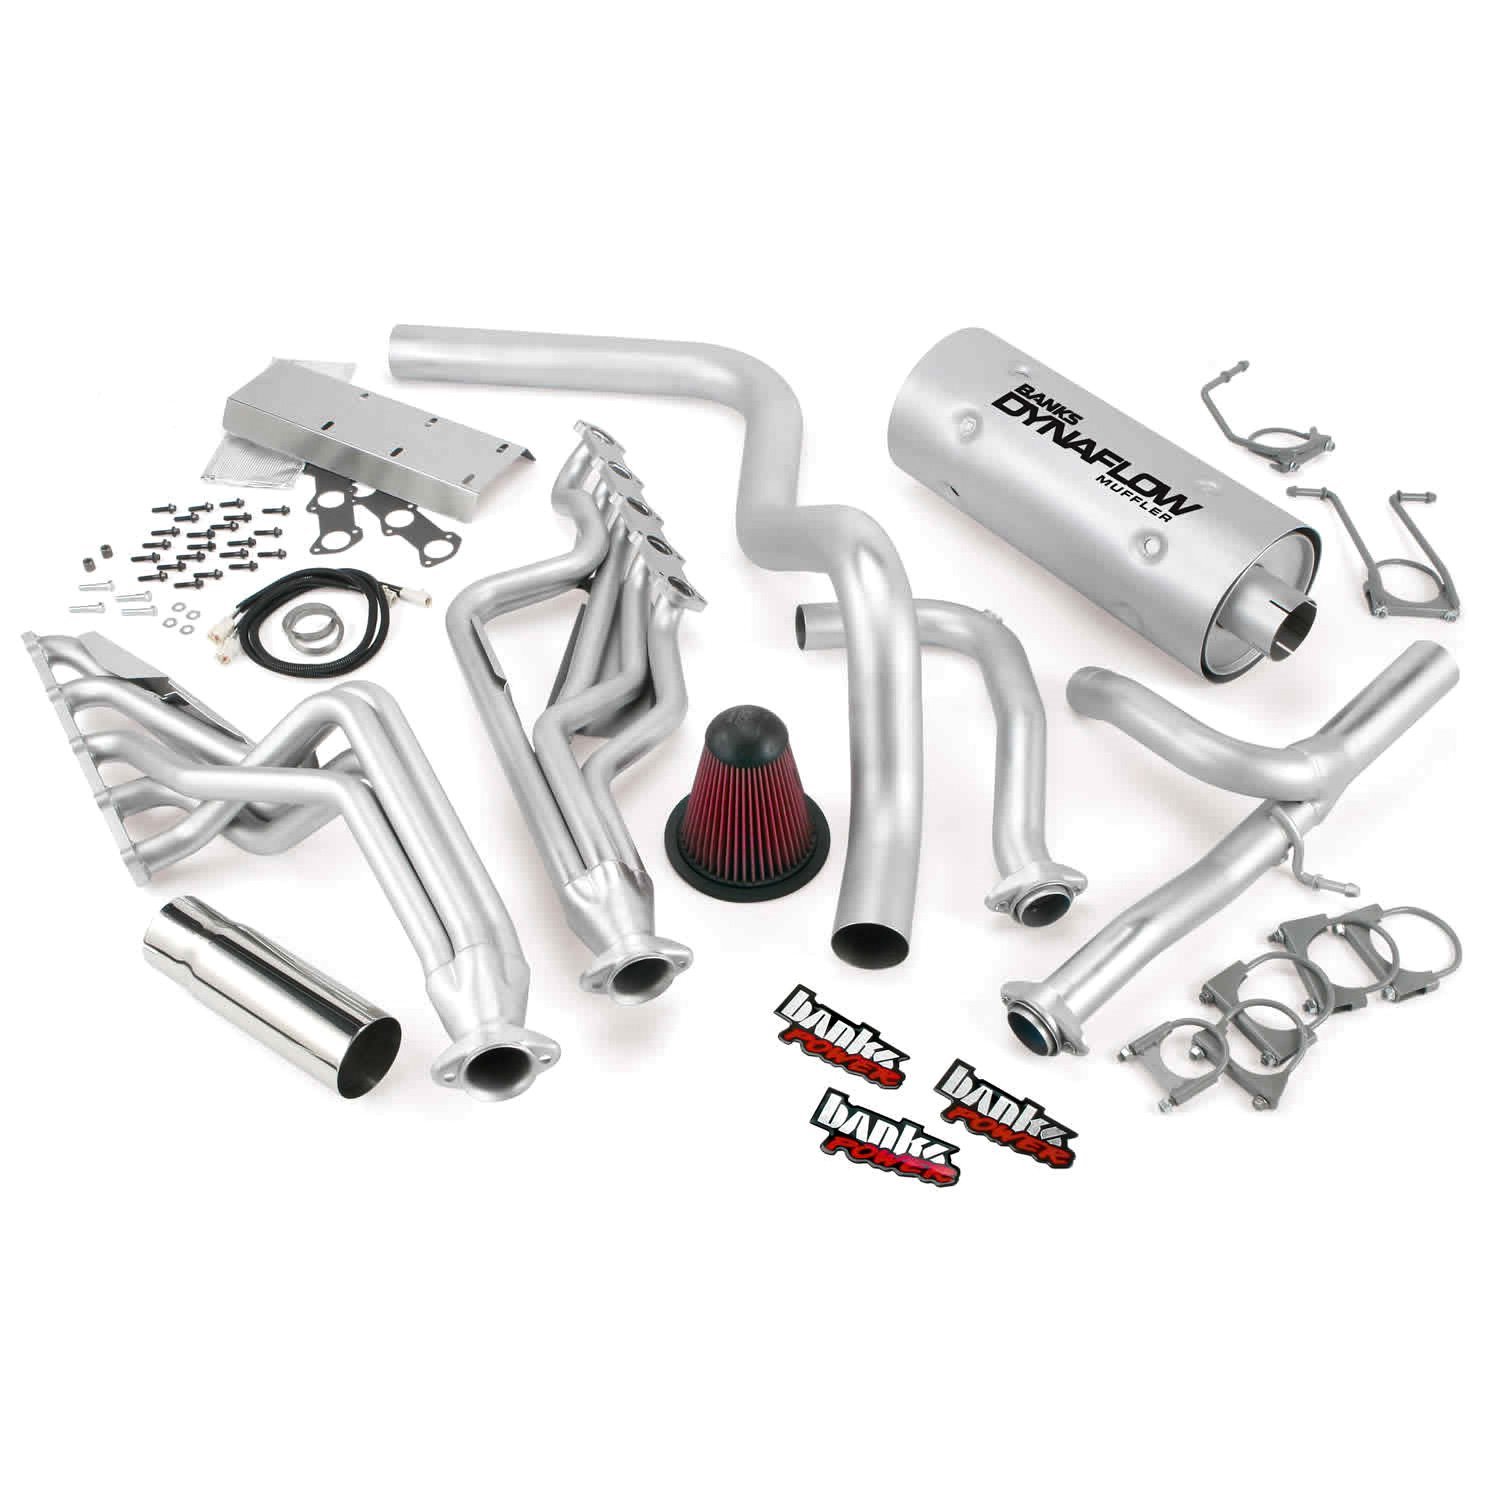 Exhaust PowerPack System 1997-06 Ford Class C Motorhome